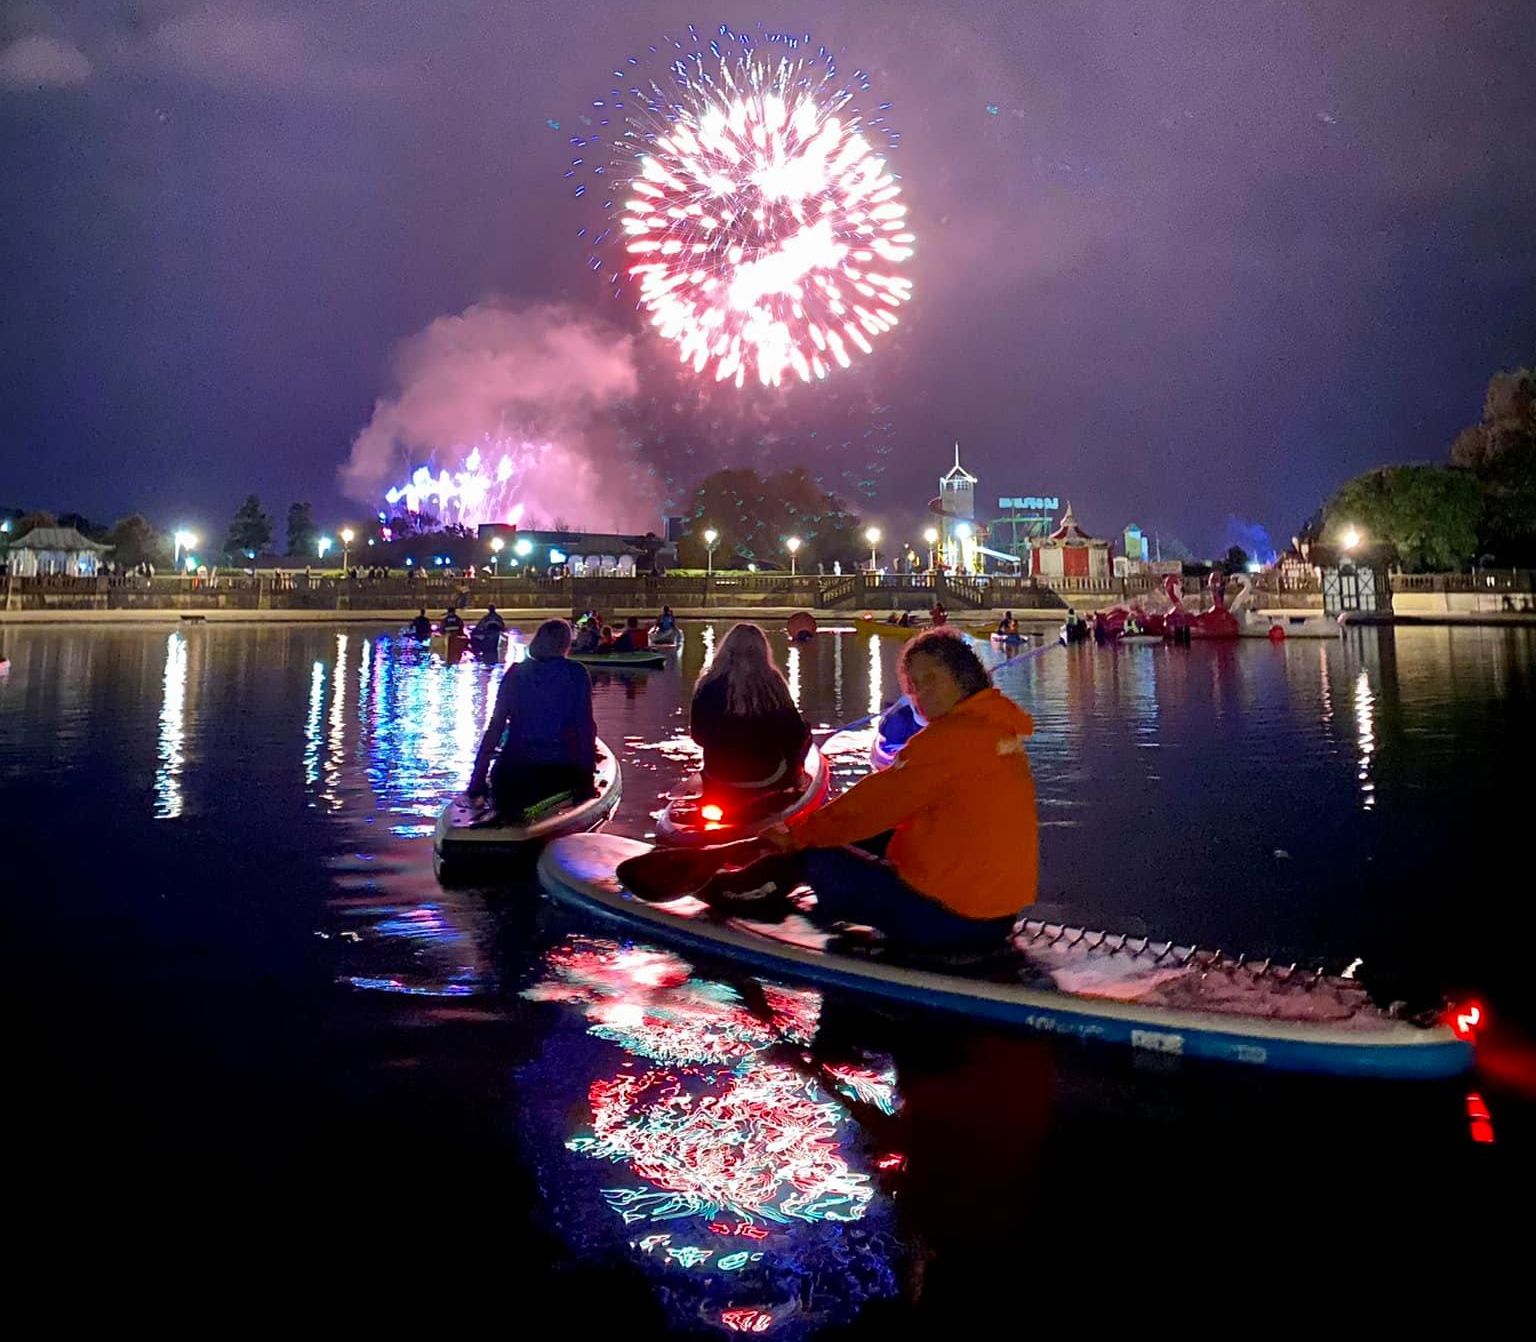 Paddle boarders from SUP North enjoy The British Musical Fireworks Championship from the Marine Lake in Southport. Photo by Alan Taylor